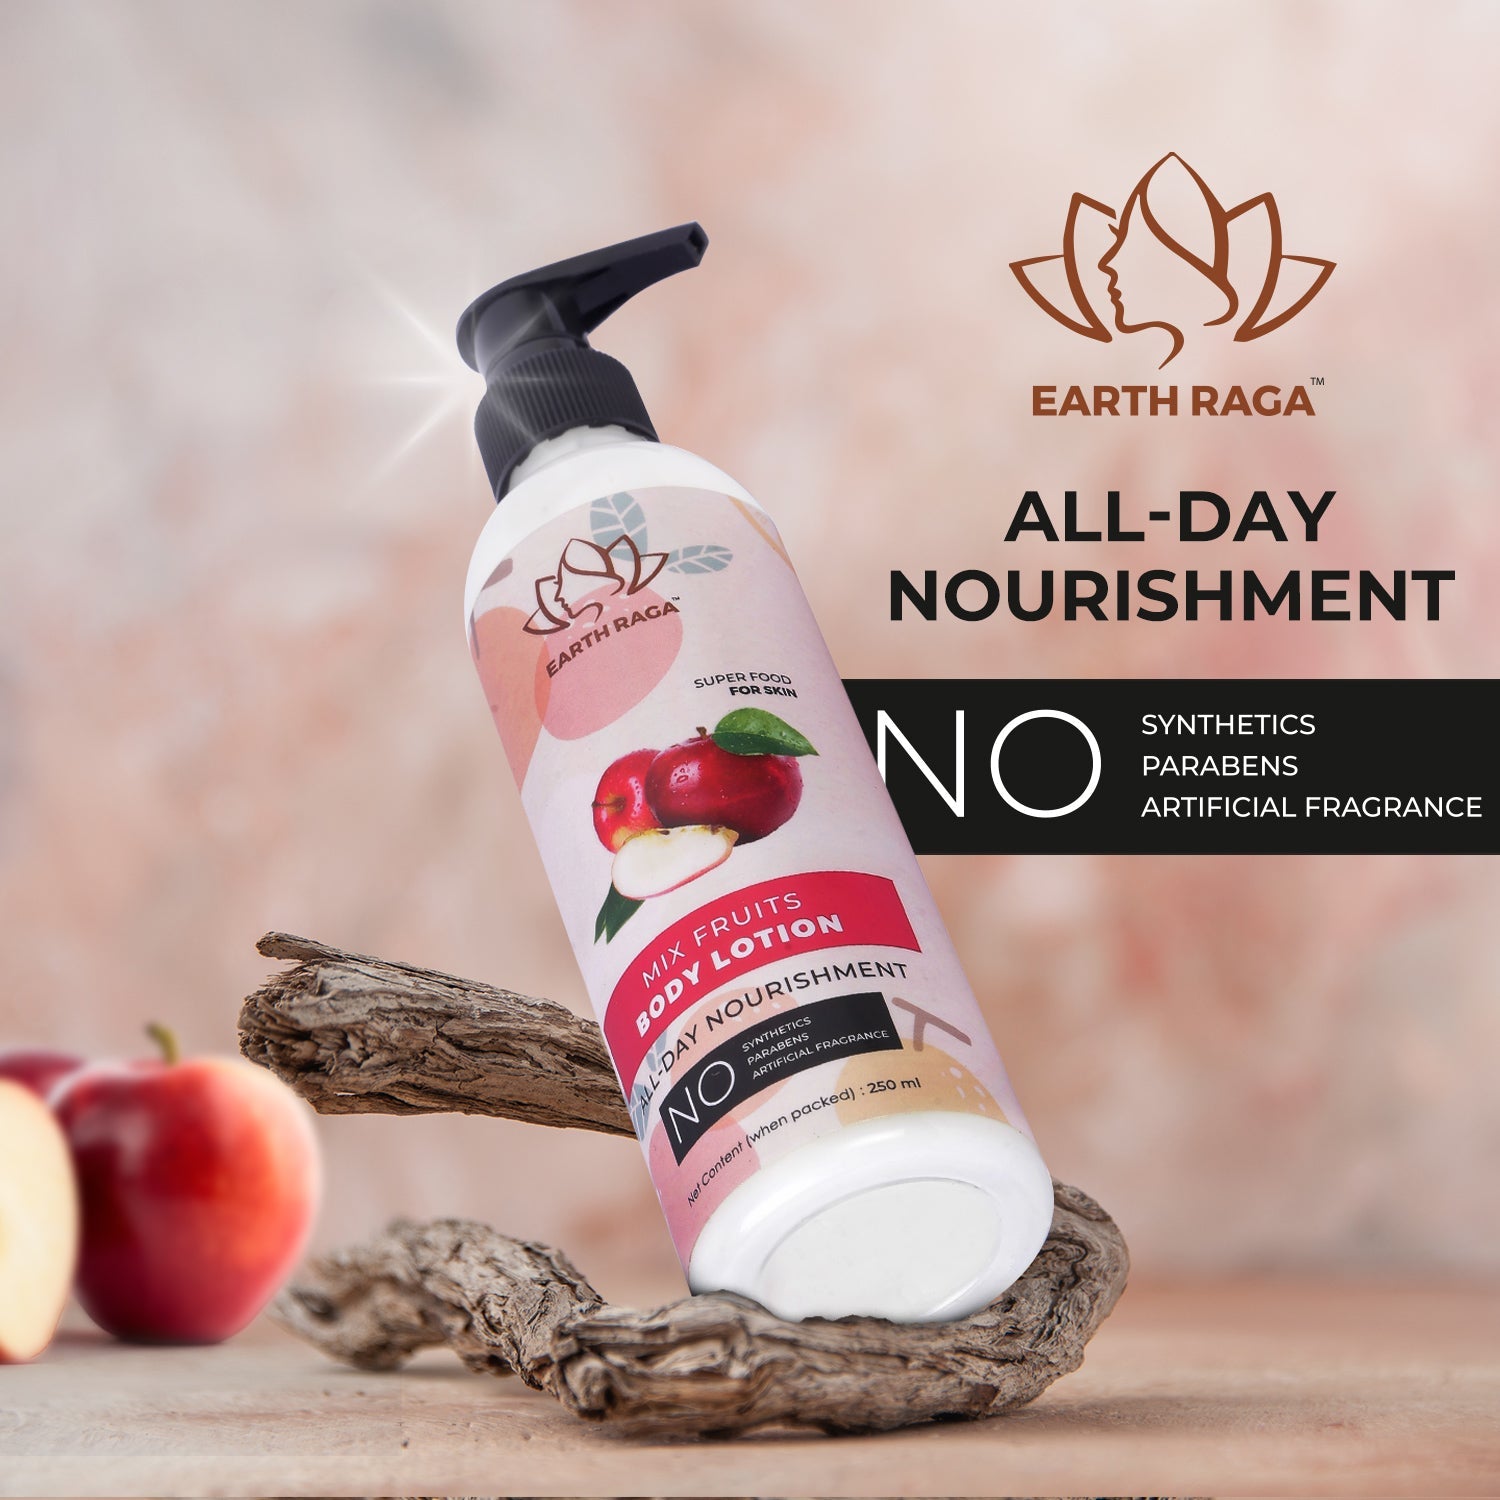 Club Cane Body Lotion and Mix Fruits Body Lotion - Great Combo Deal